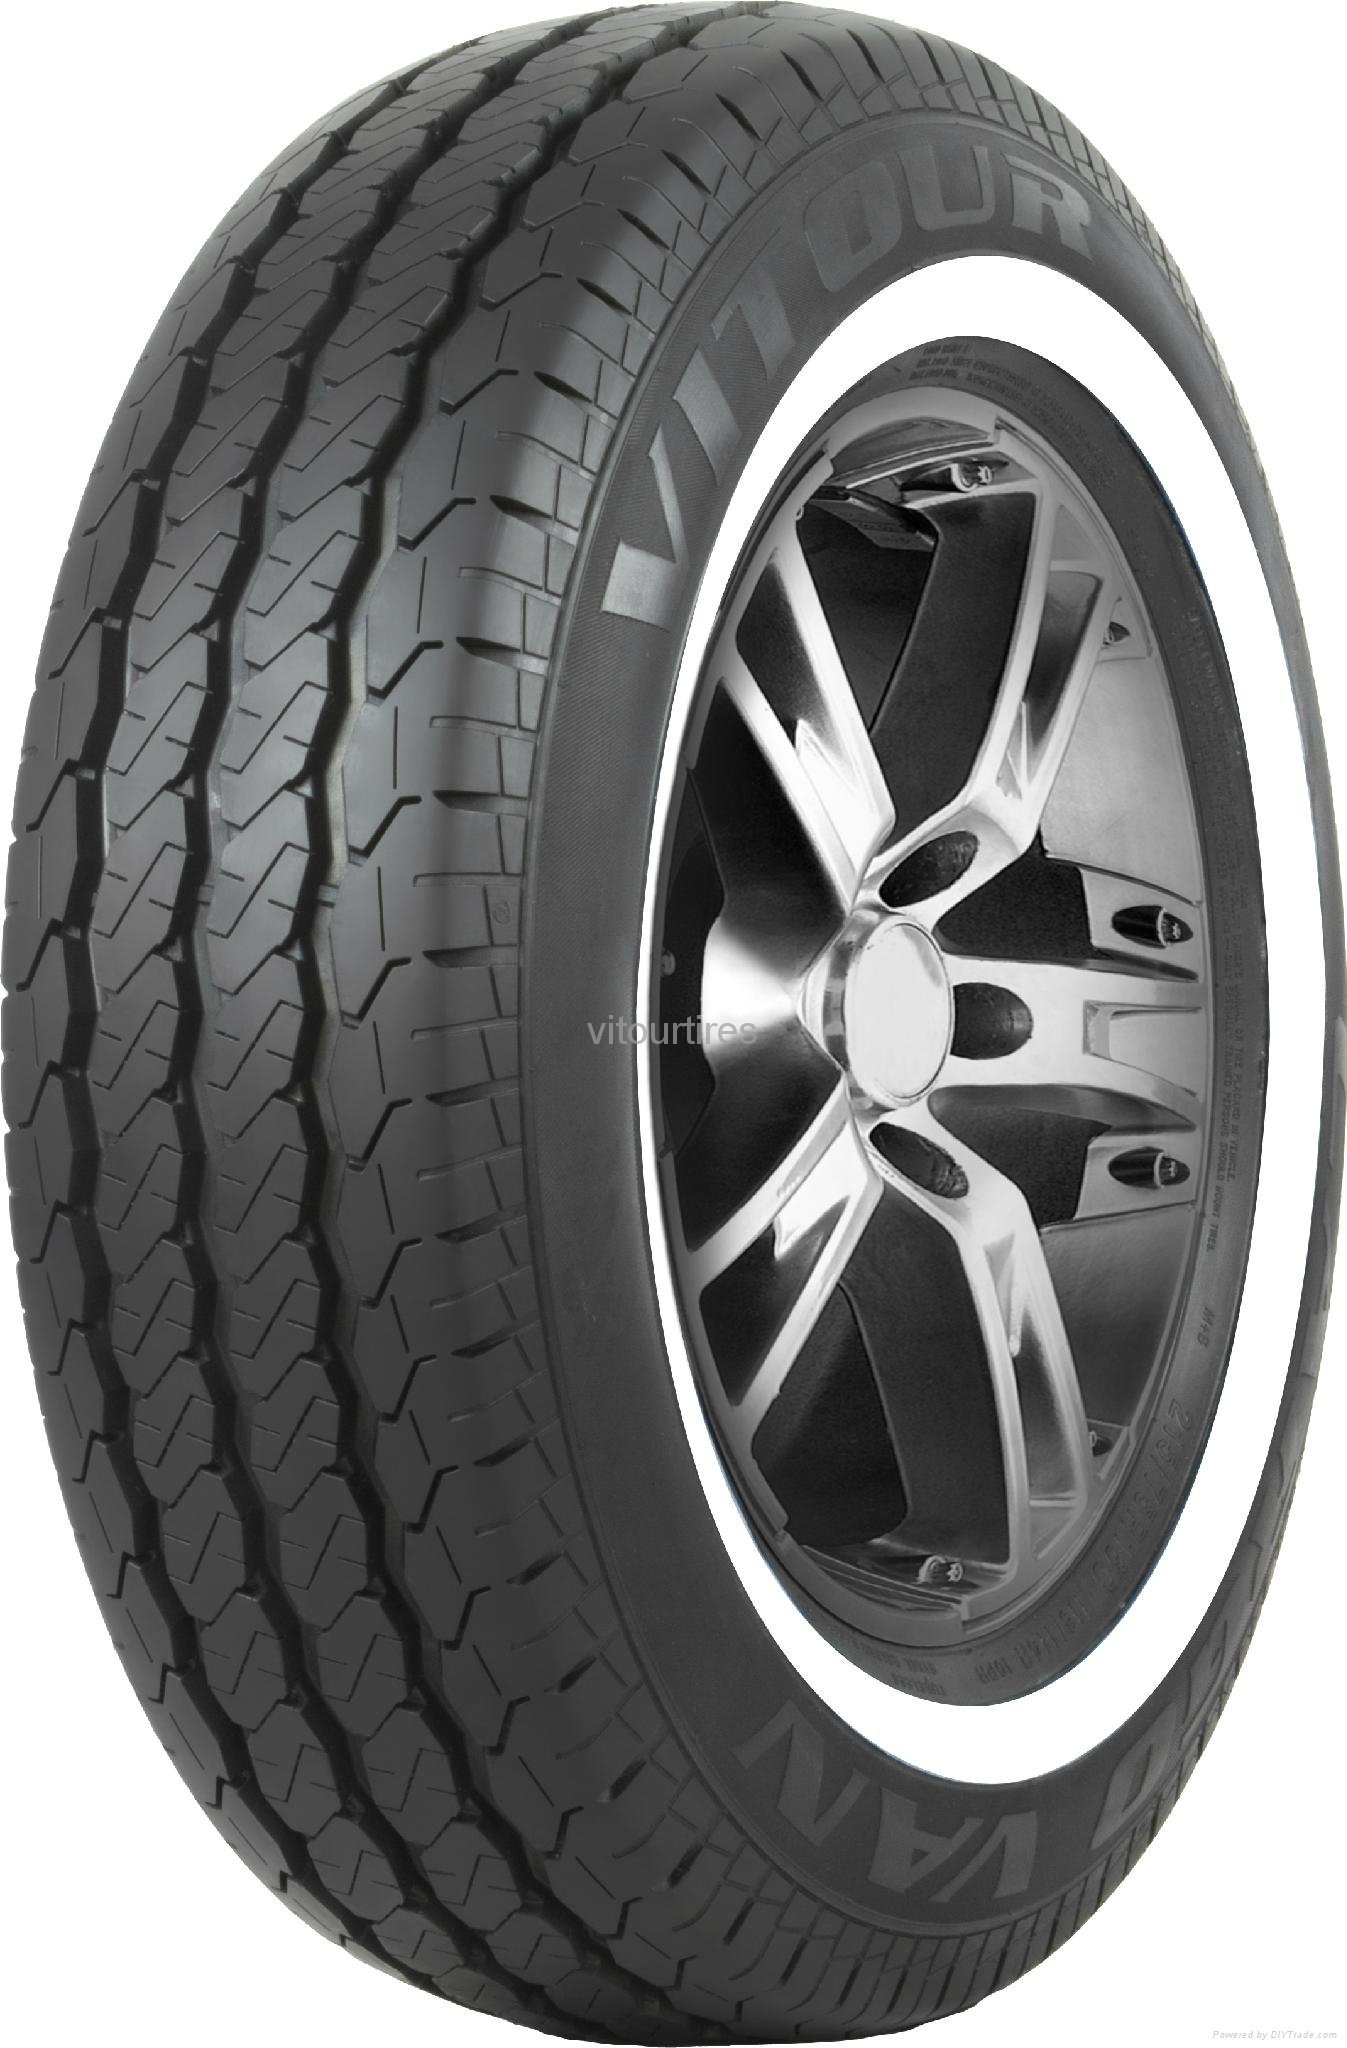 White side wall LTR Tires 2